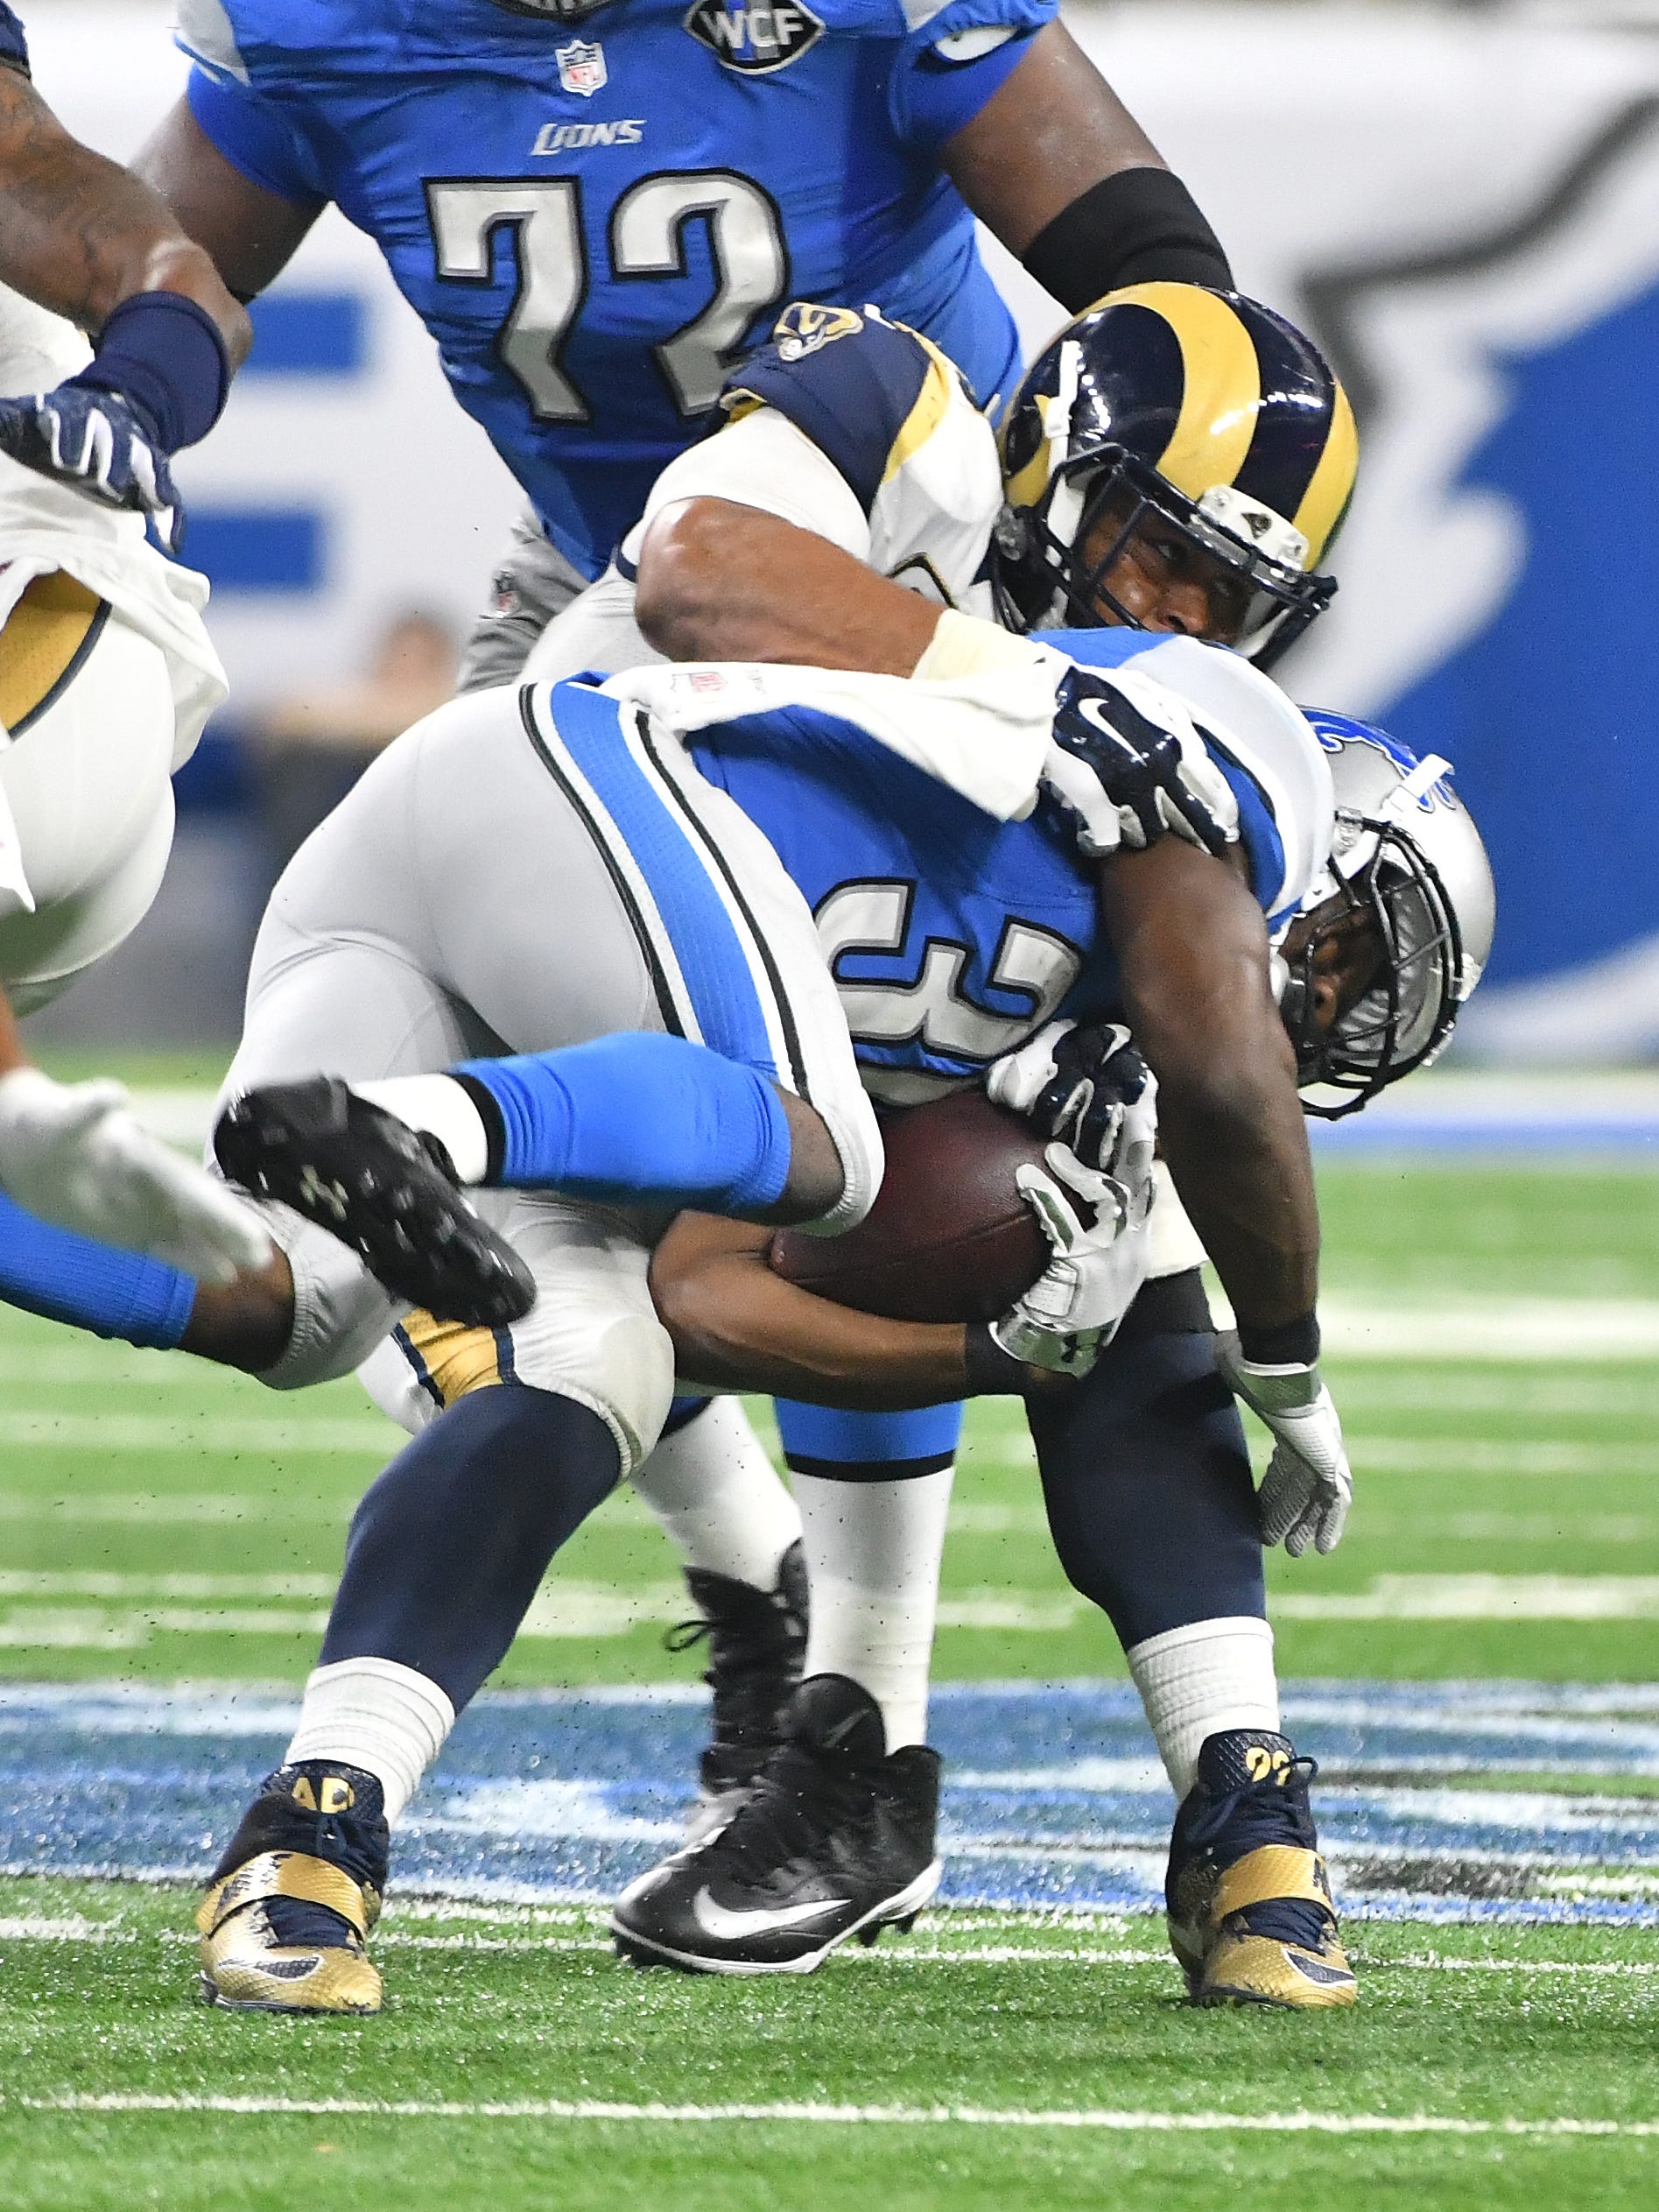 Rams Aaron Donald slams Lions running back Justin Forsett to the turf in the fourth quarter.